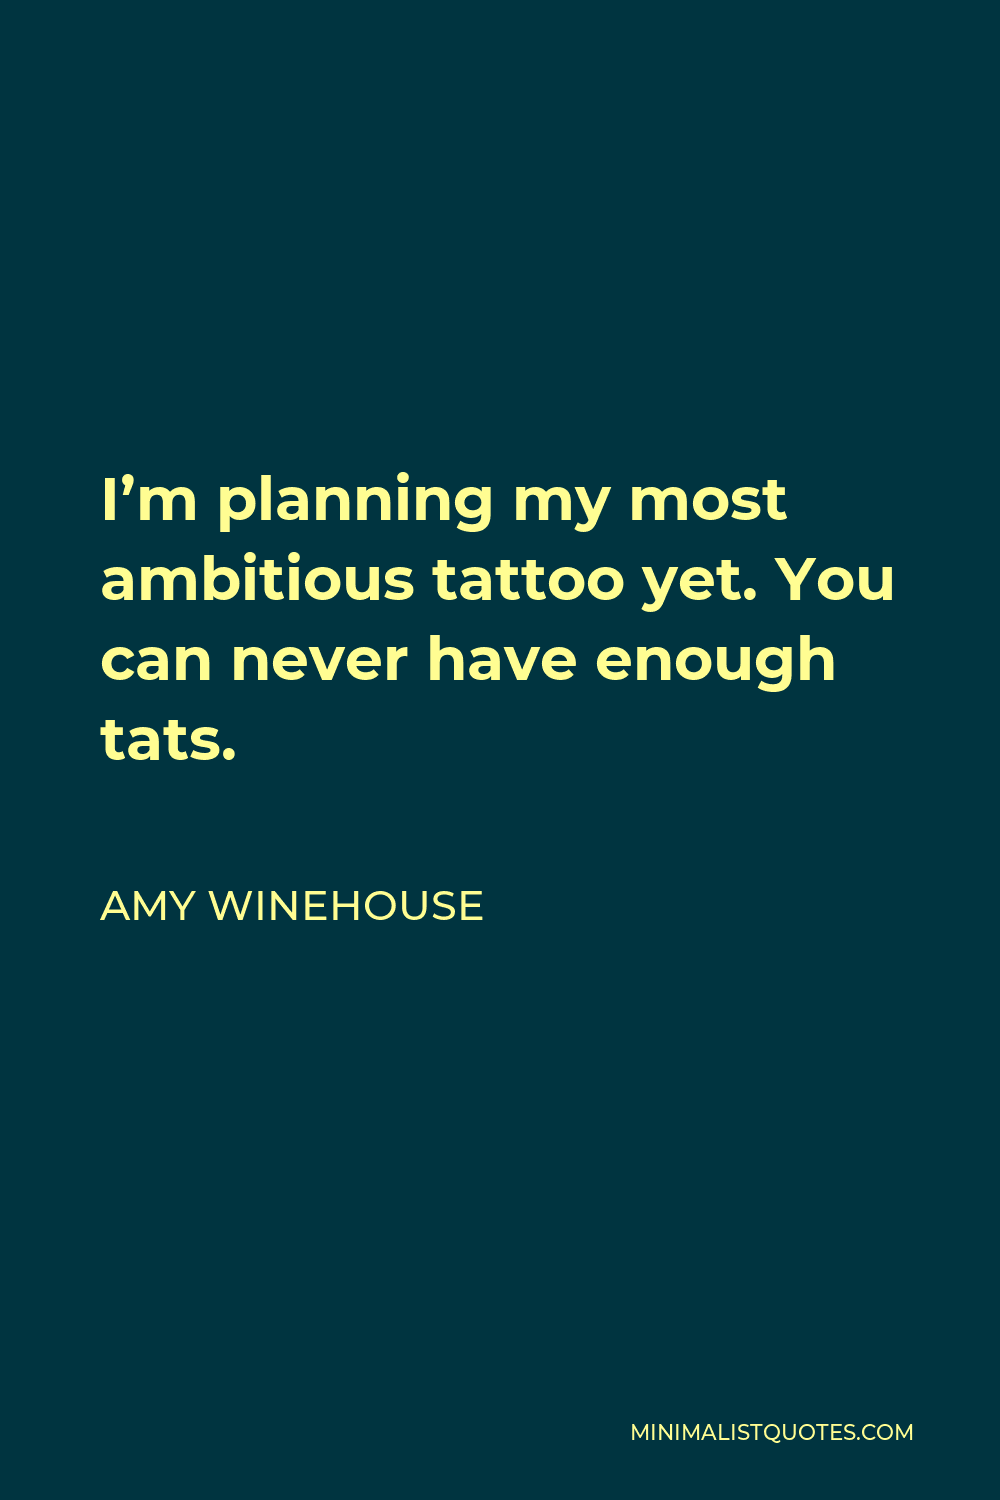 Amy Winehouse Quote - I’m planning my most ambitious tattoo yet. You can never have enough tats.